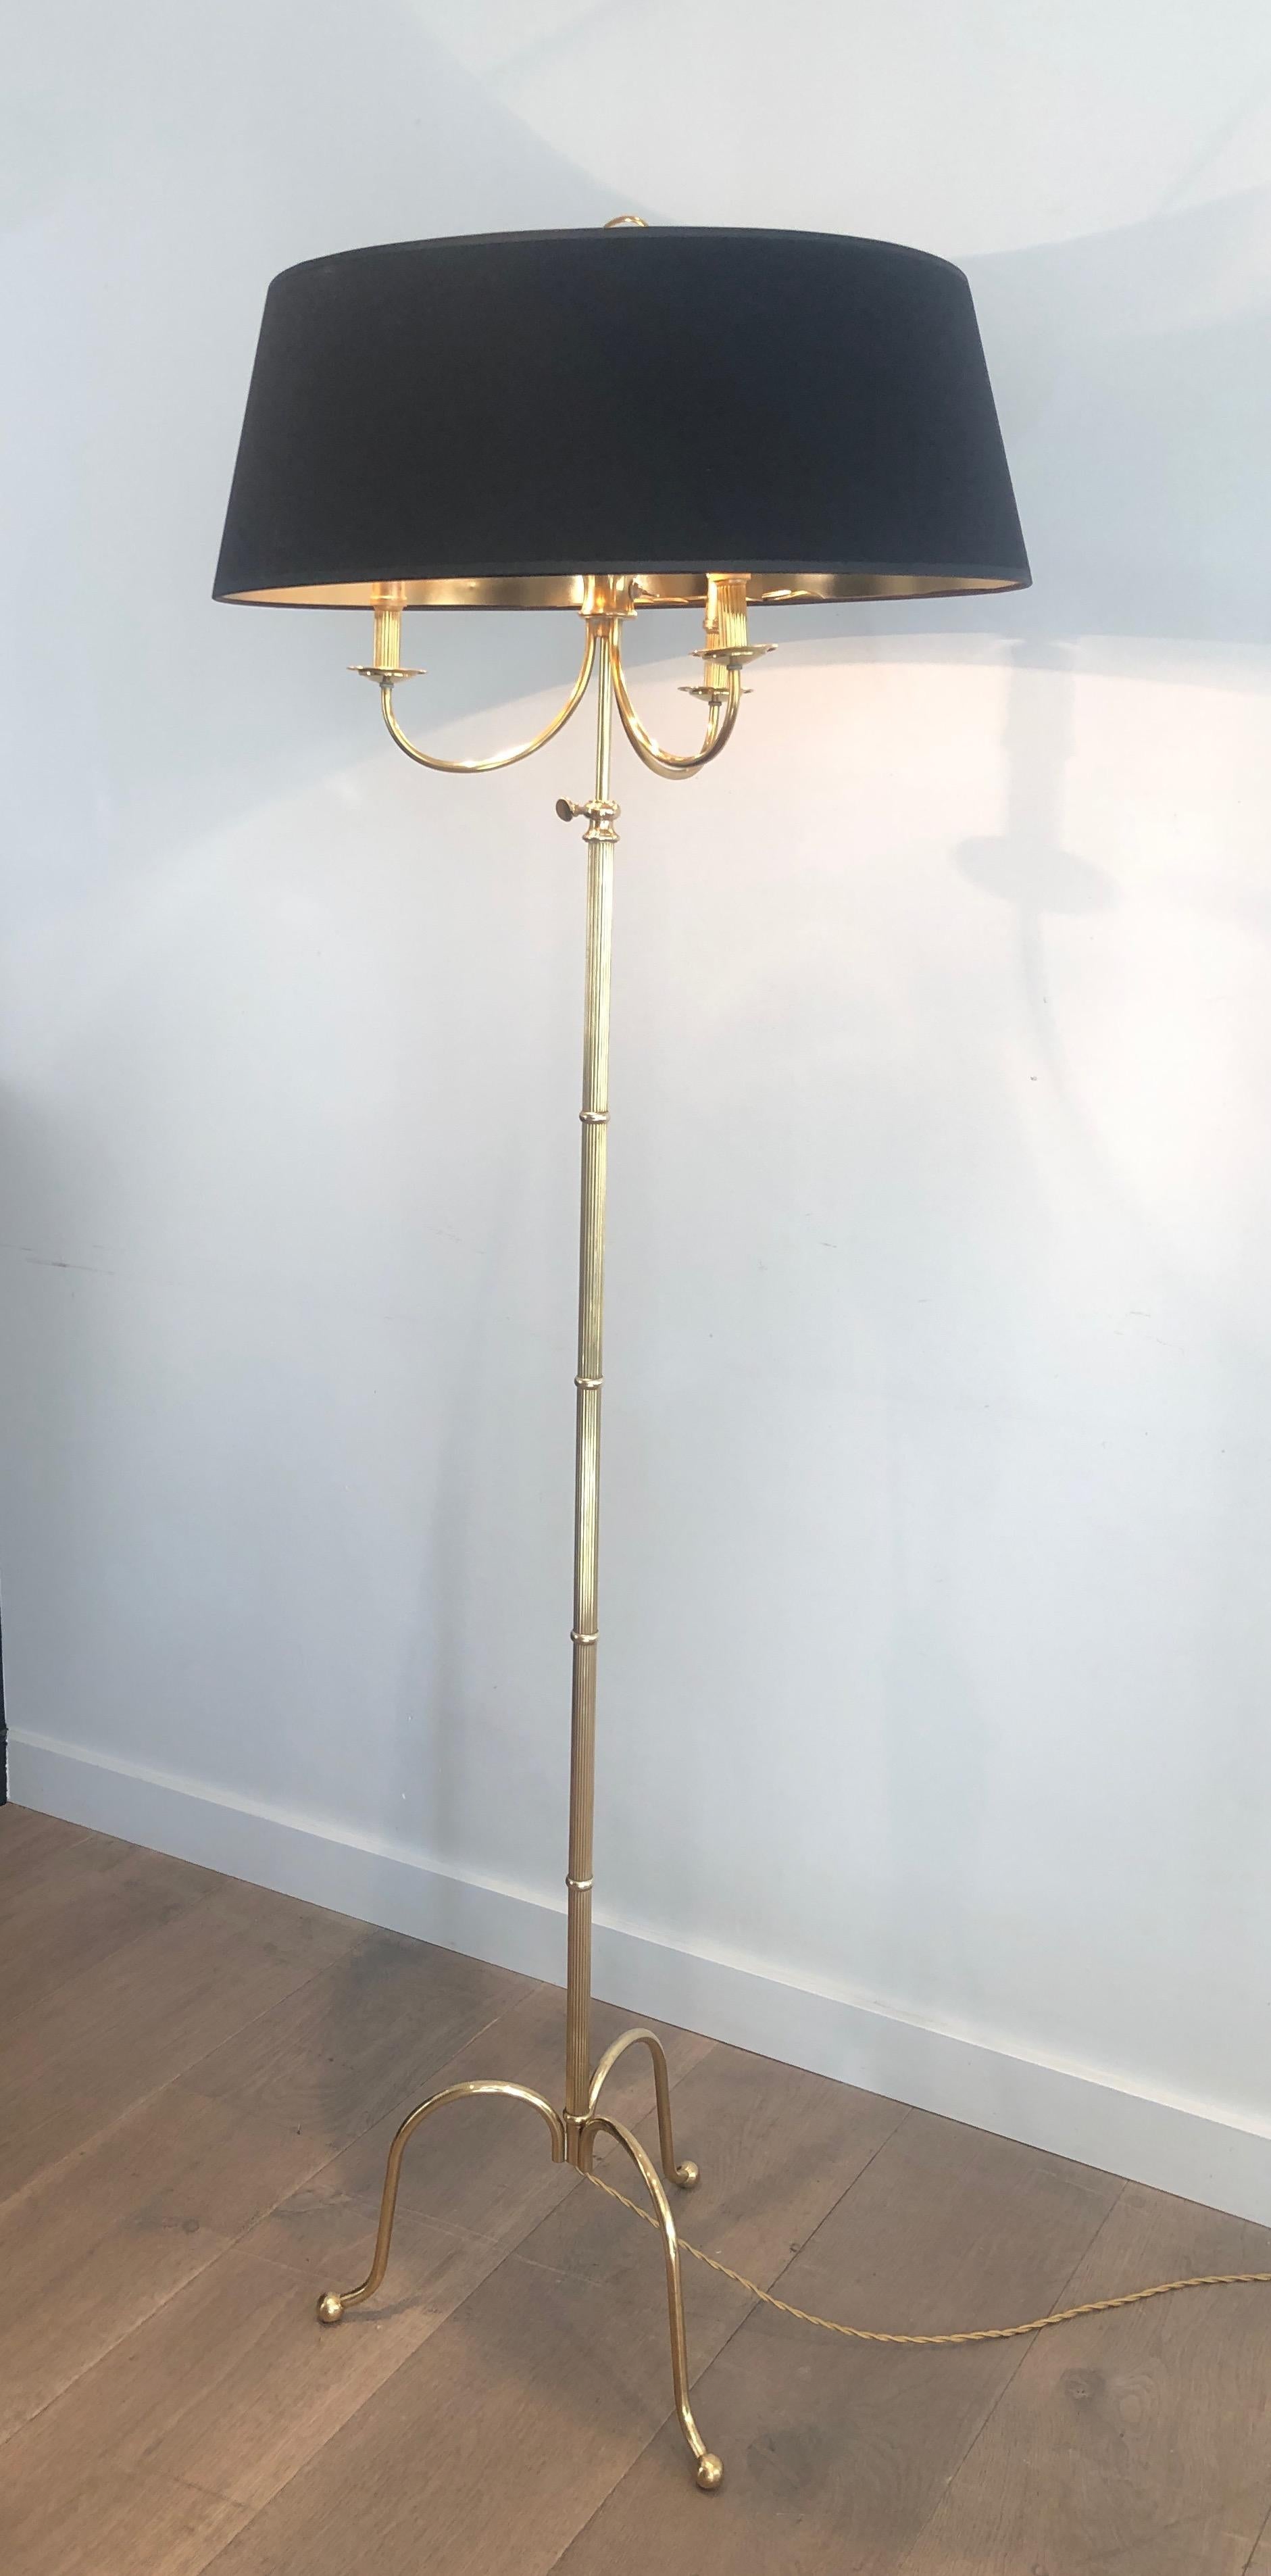 Tripode Brass Floor Lamp with 3 Arms, French Work by Maison Jansen In Good Condition For Sale In Marcq-en-Barœul, Hauts-de-France